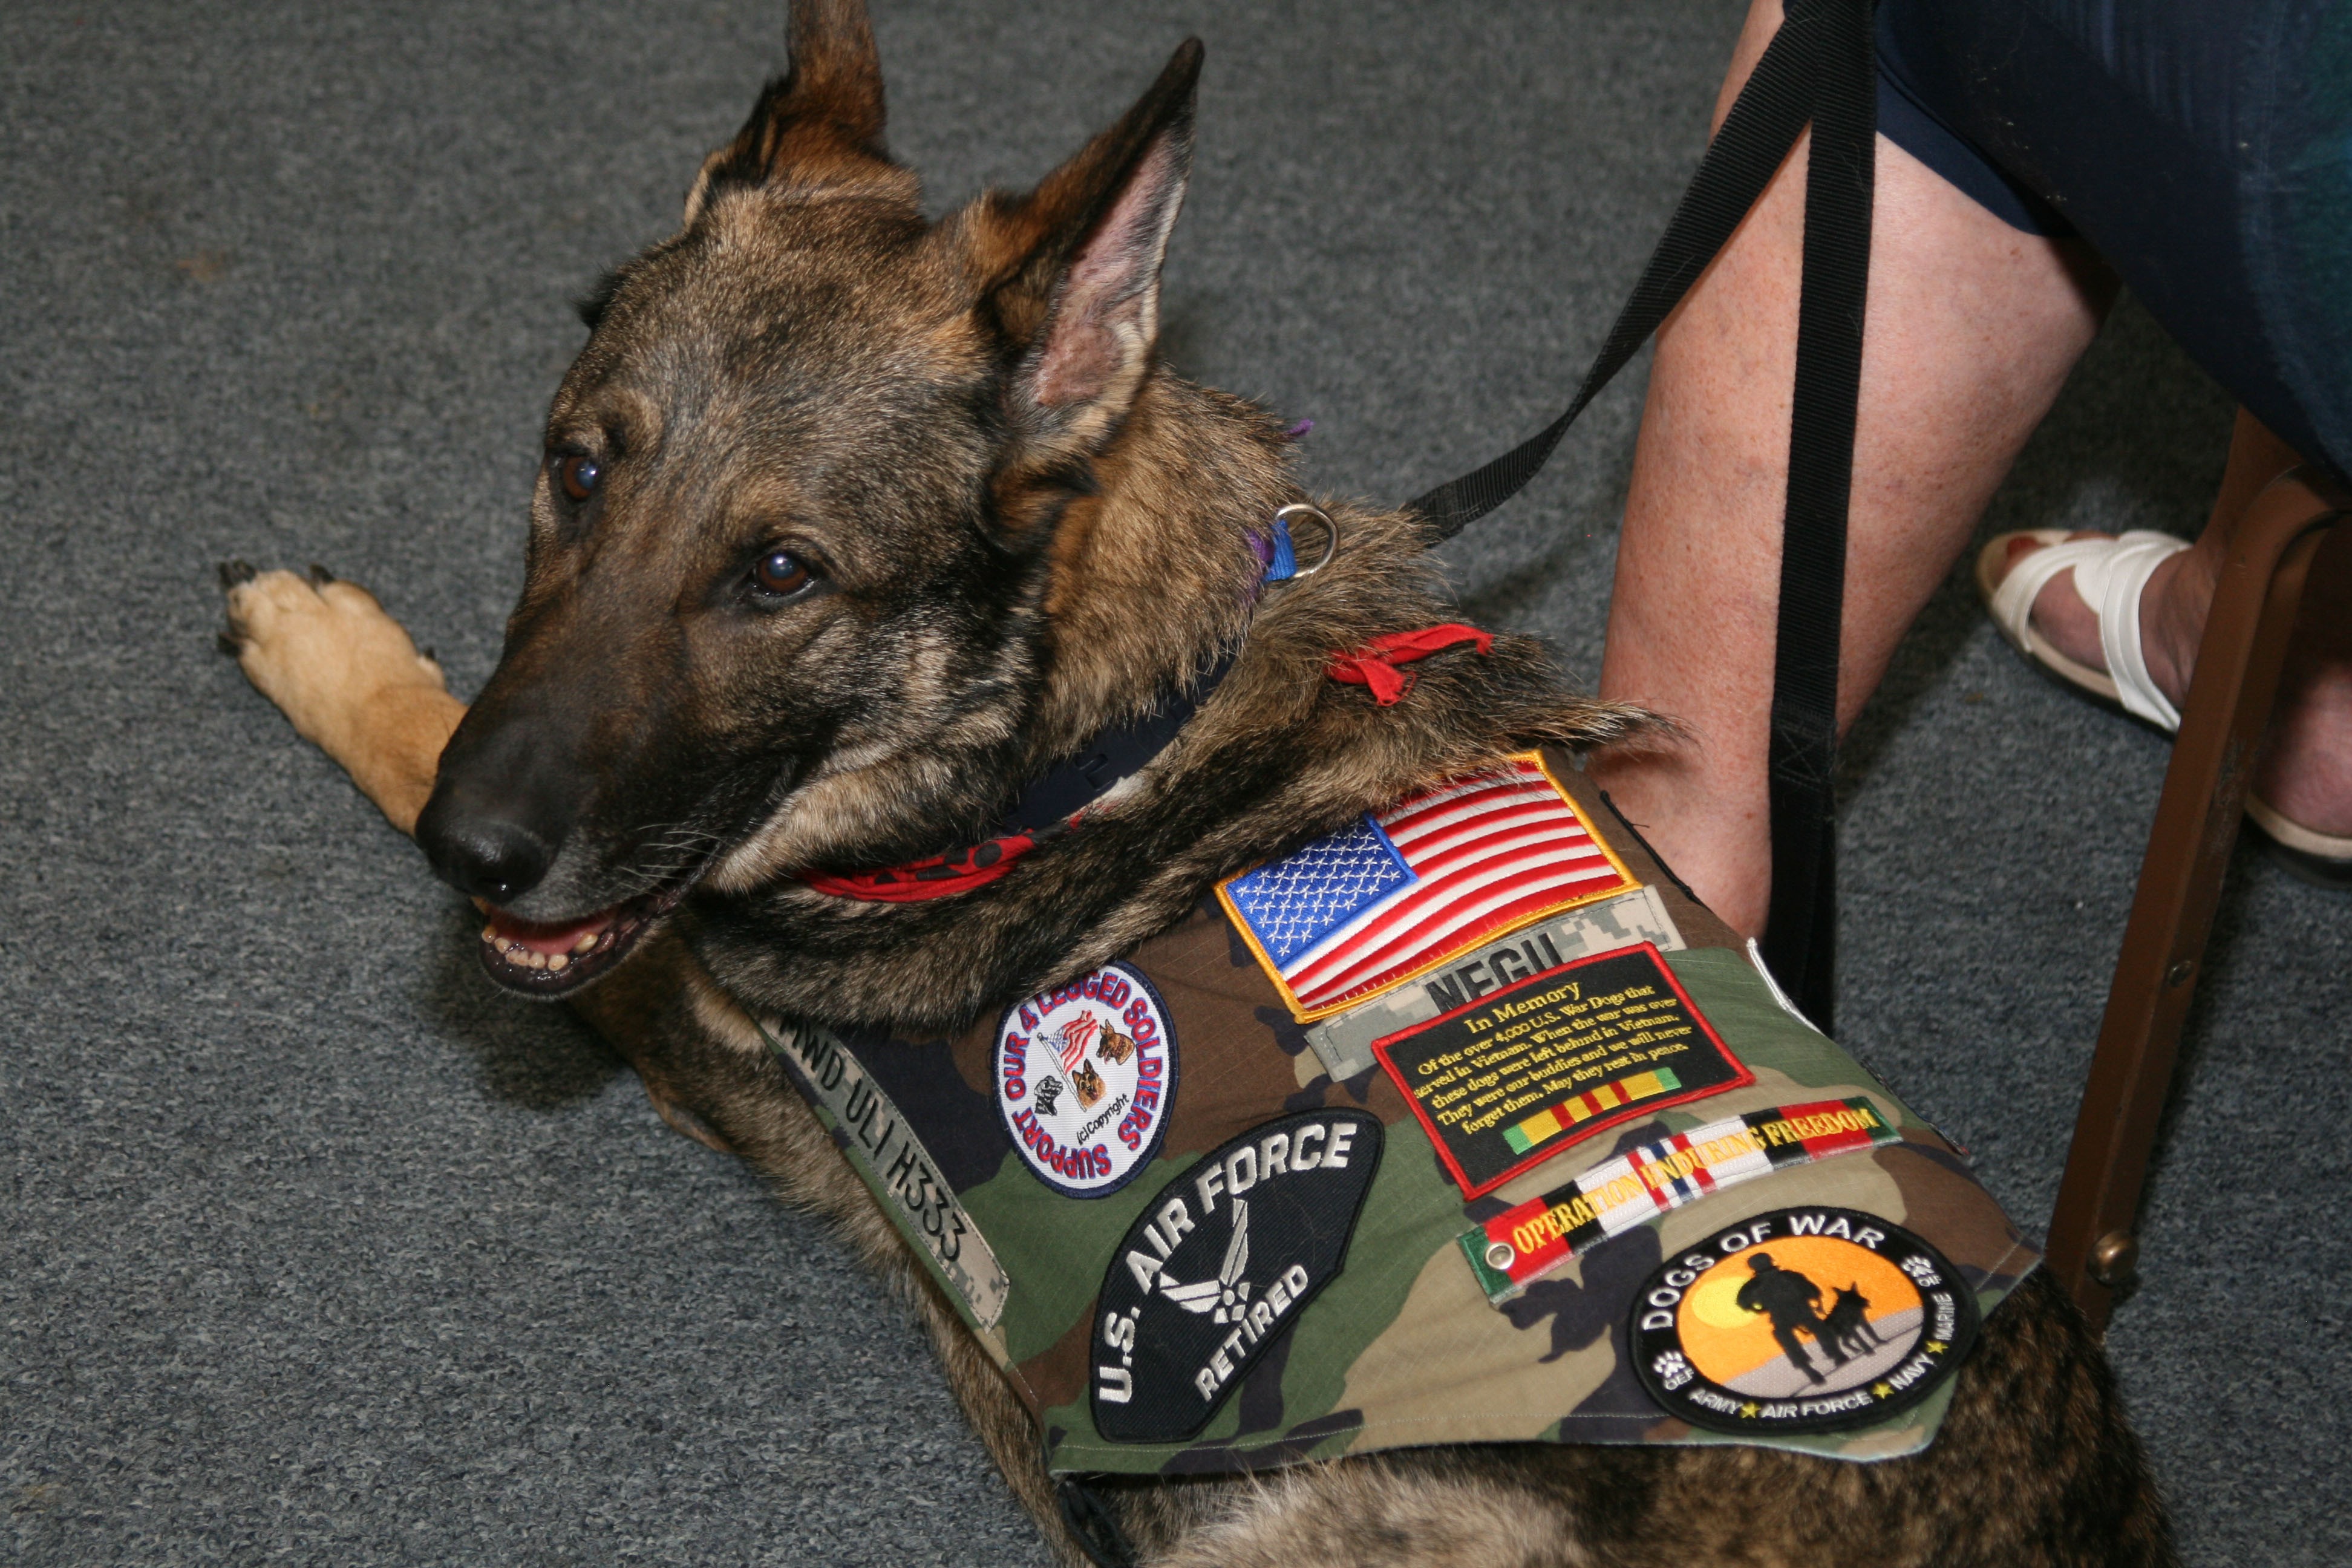 Memorial ceremony honors service of military working dog